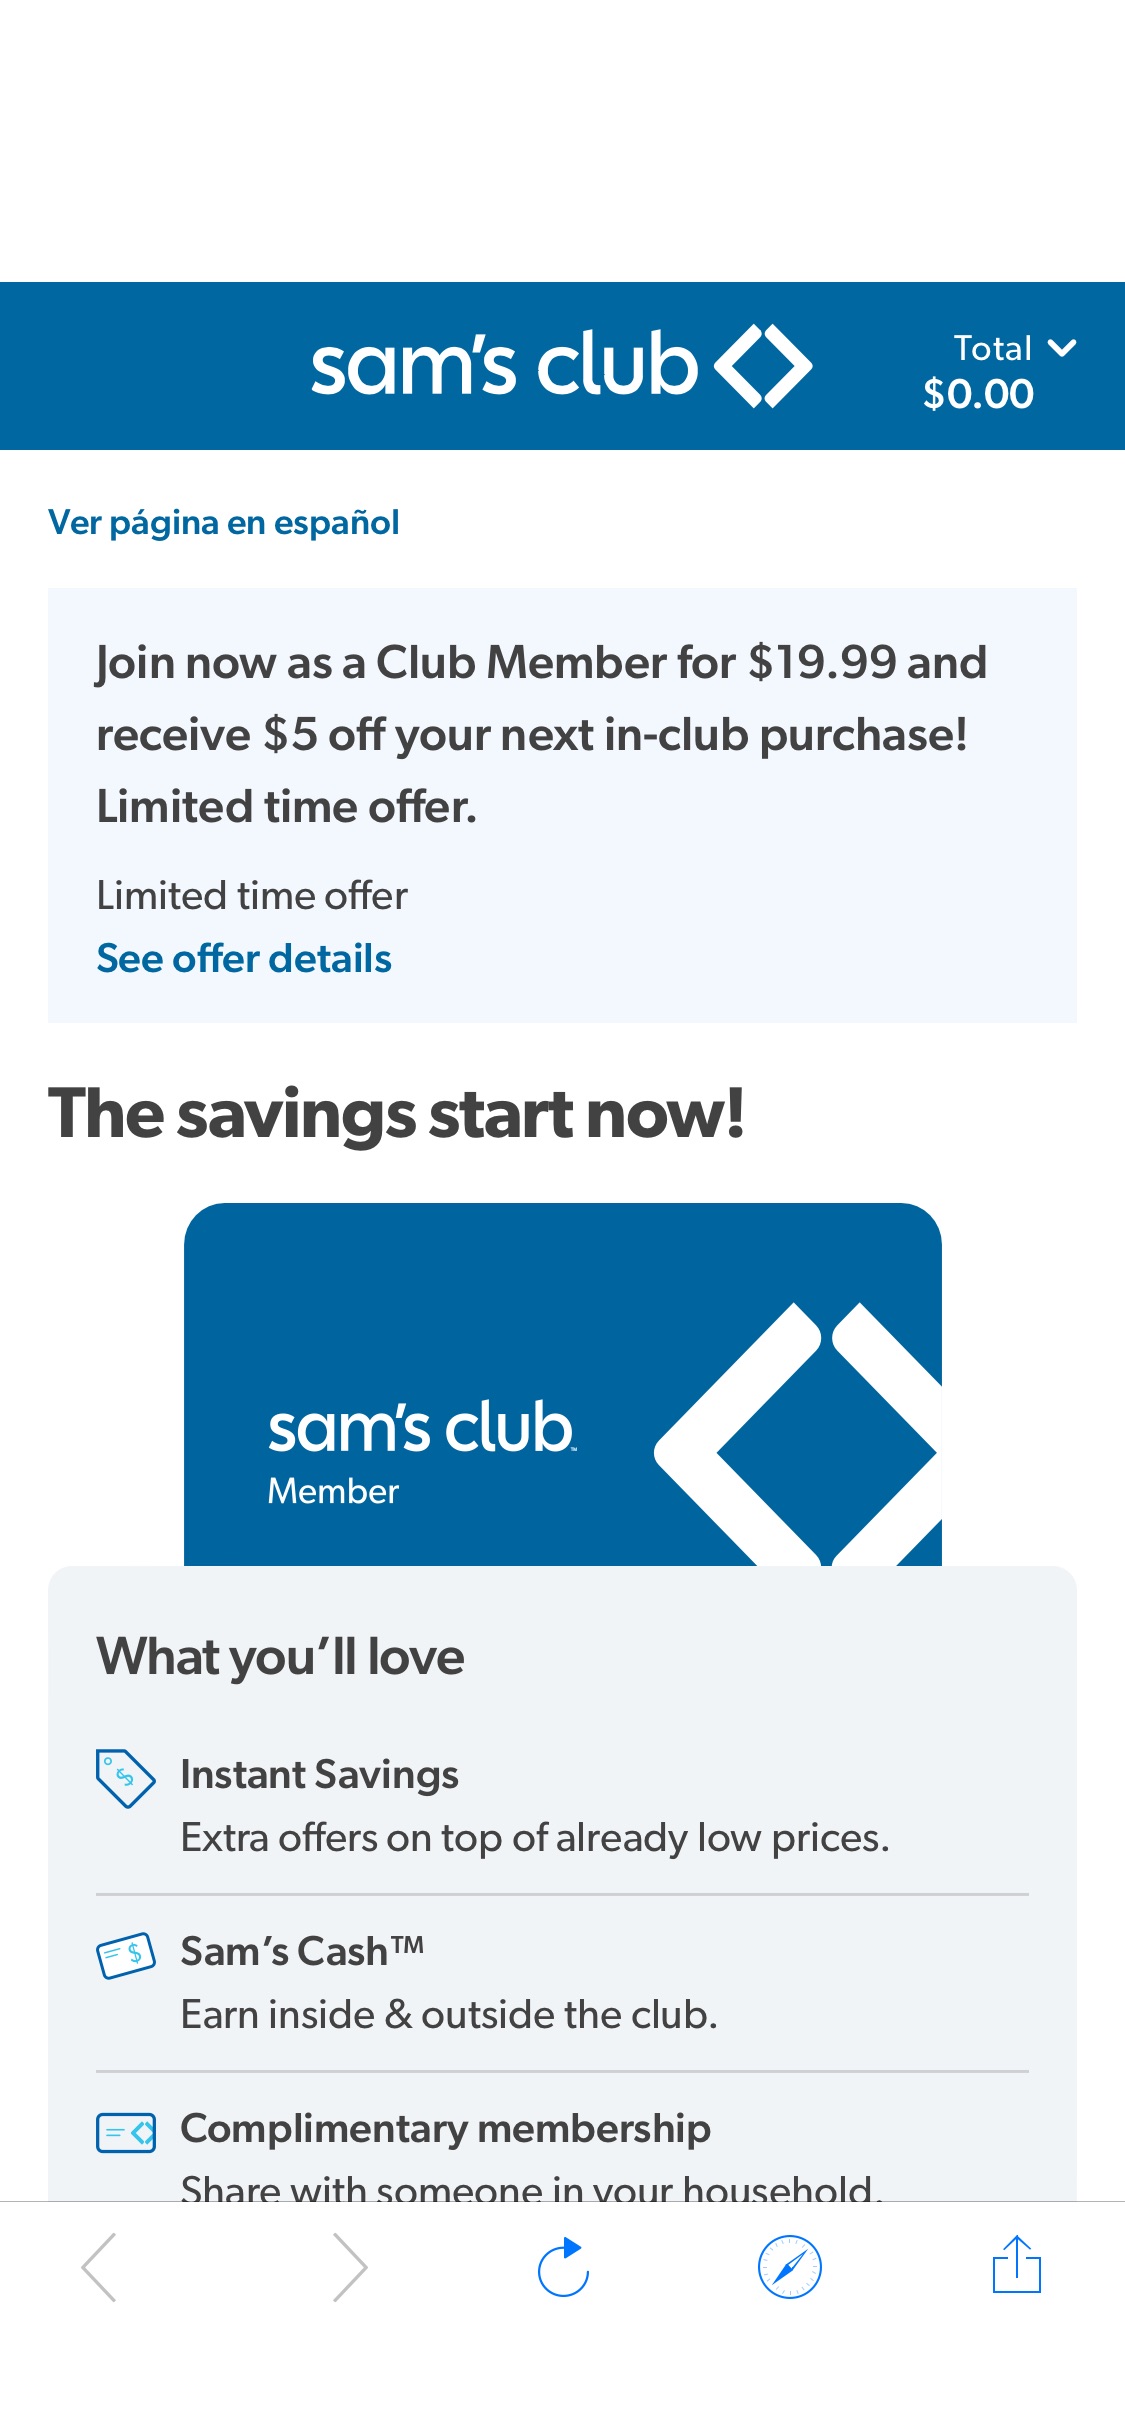 Sams Club has 1-Year Sam's Club Membership + 5 Off your next in-club purchase for $20. New customers only. Ends 3/16.